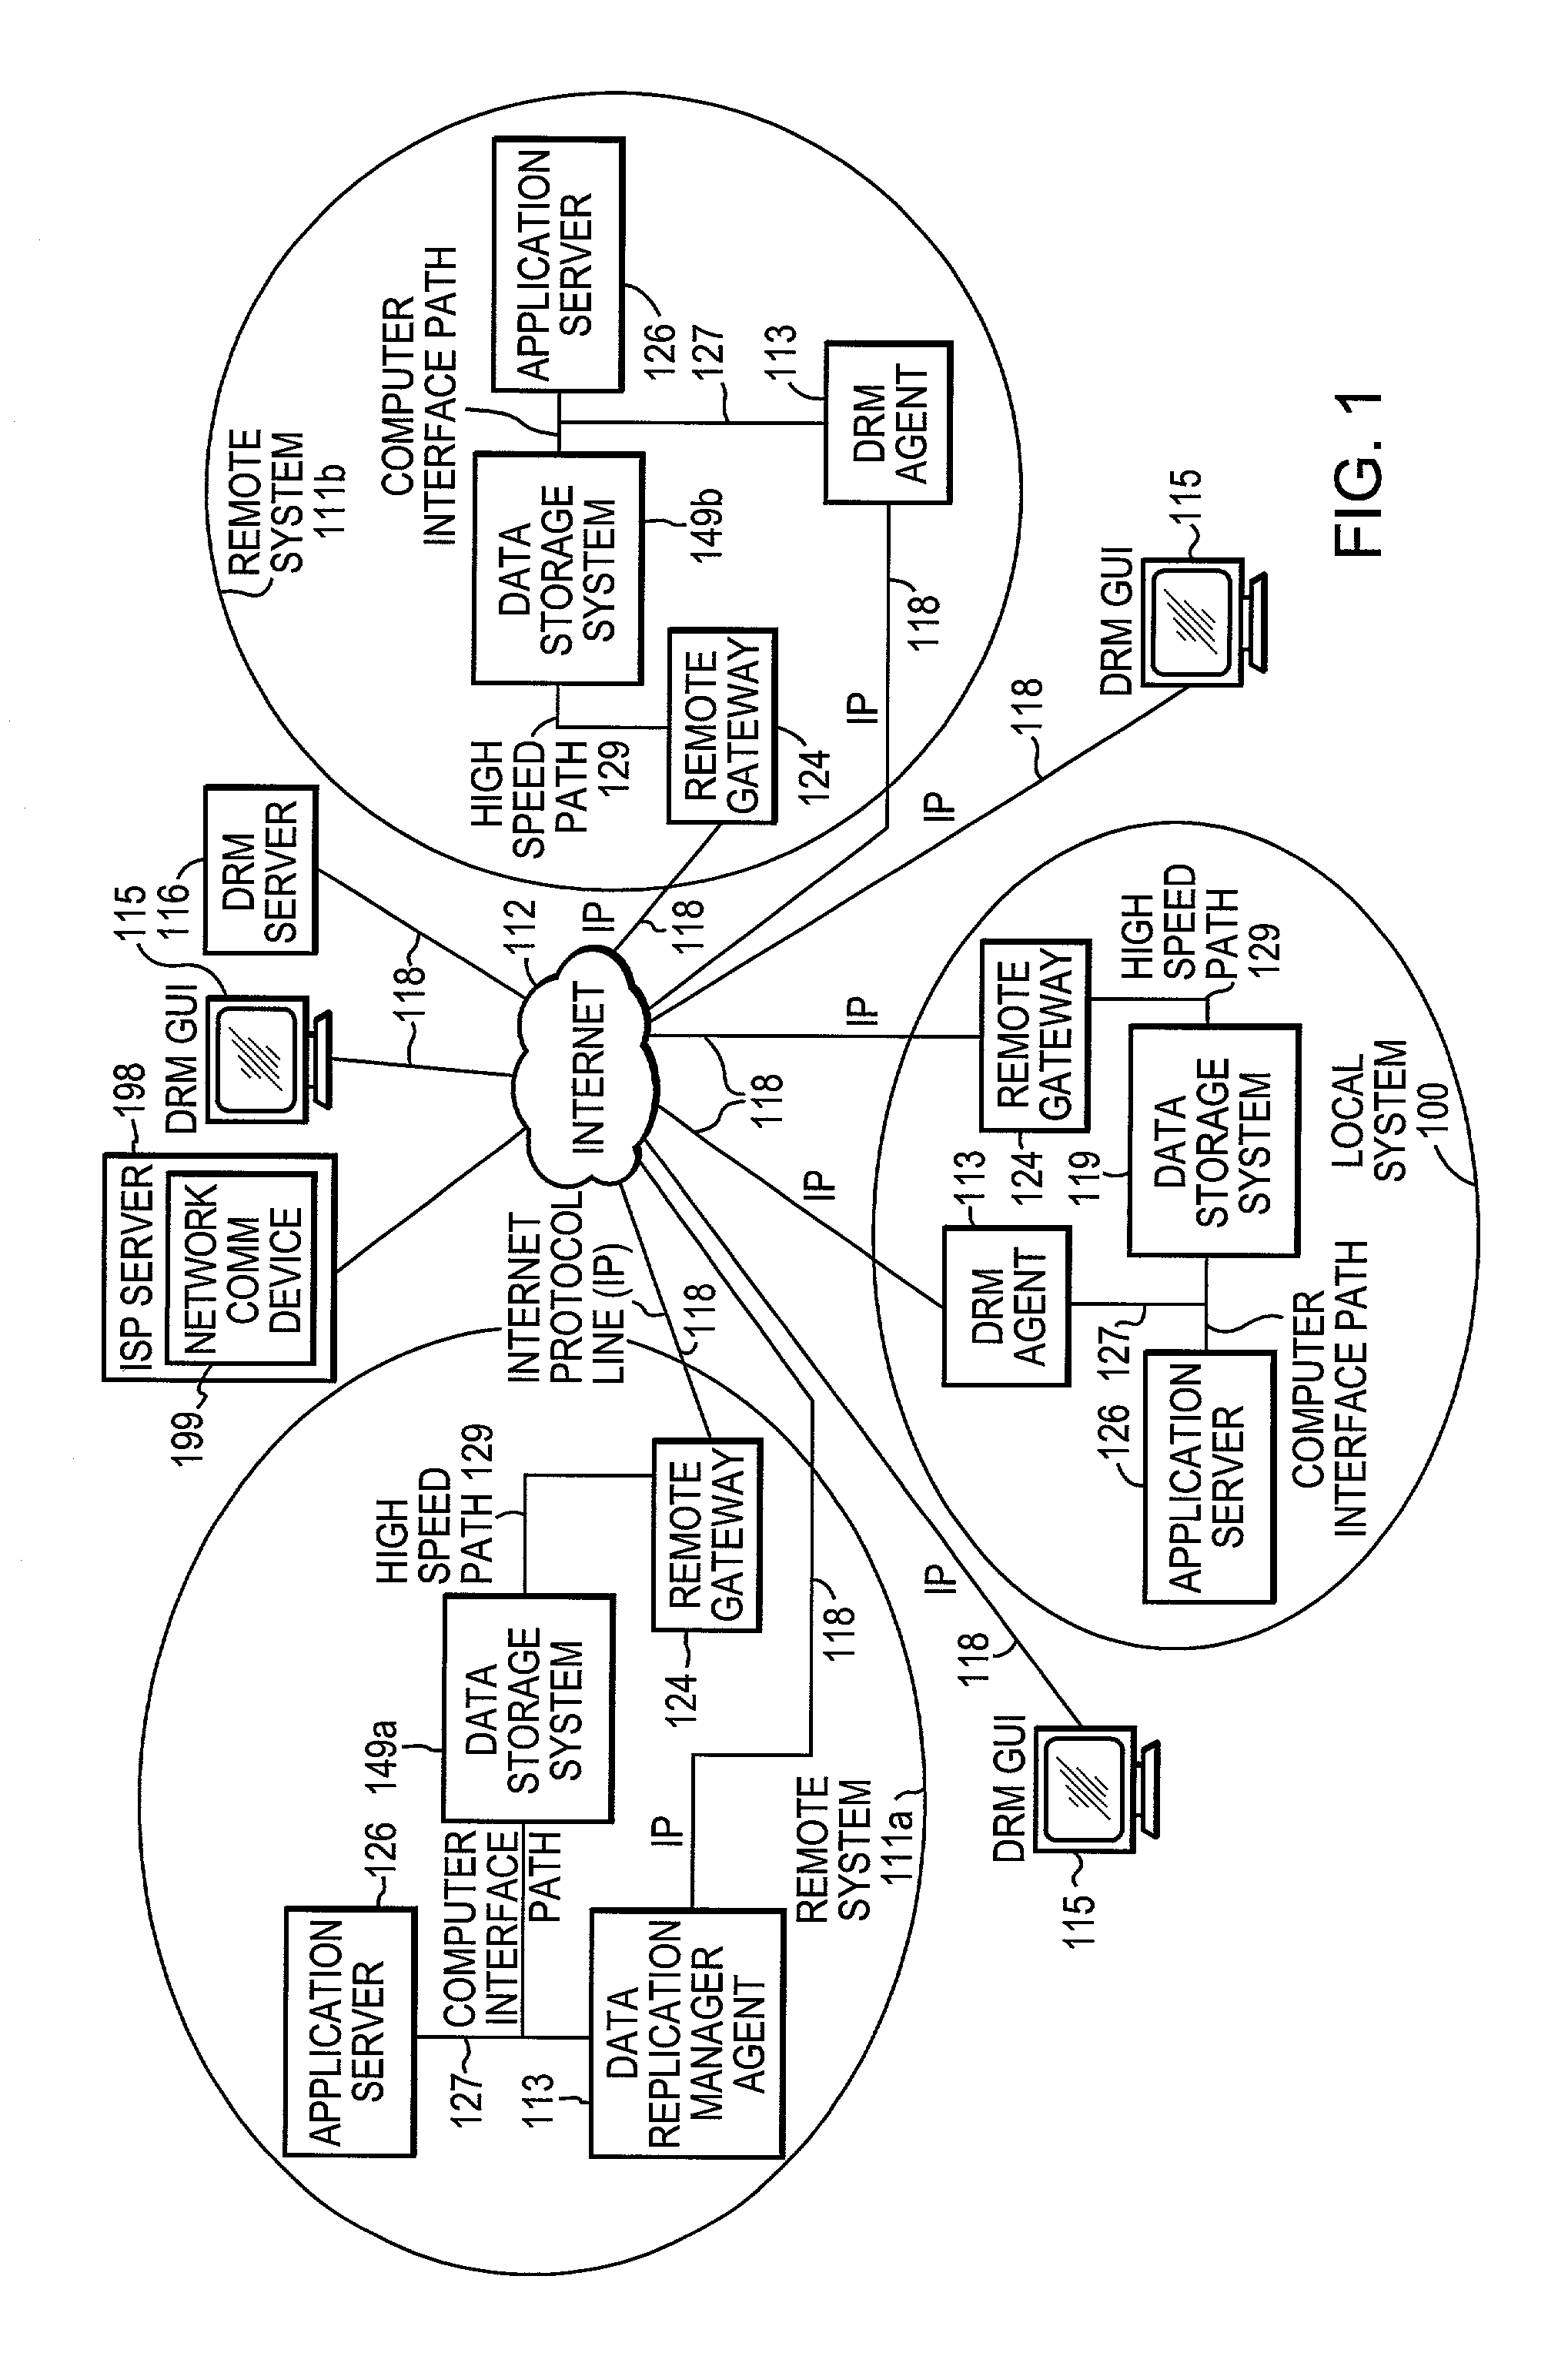 Network management for replication of data stored in a data storage environment